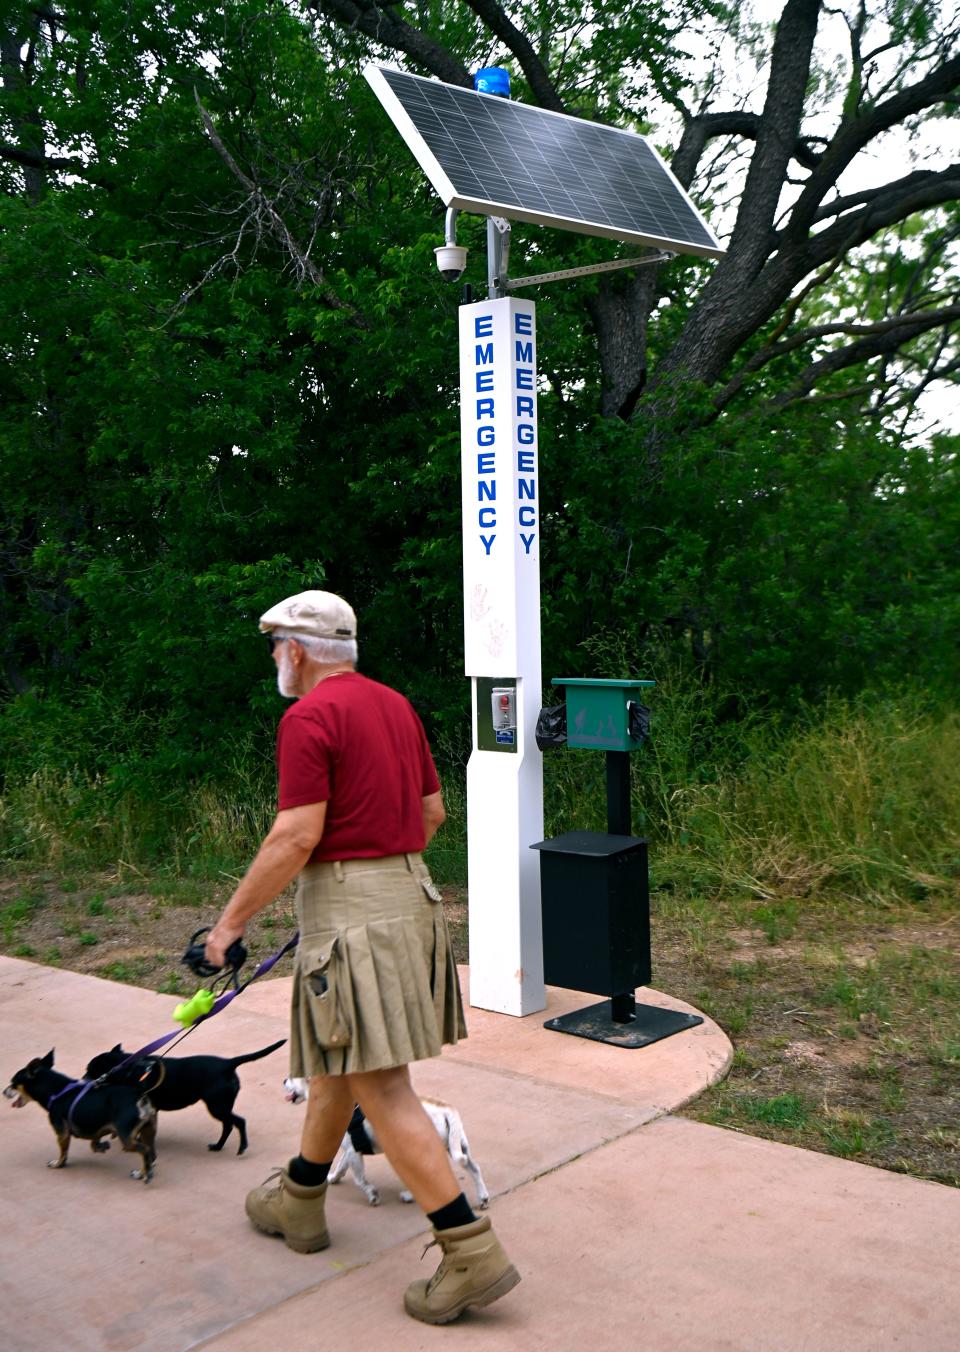 One of the solar-powered emergency contact stations located along the Cedar Creek Waterway April 27. Police officers riding bicycles were also seen on the trail Saturday.